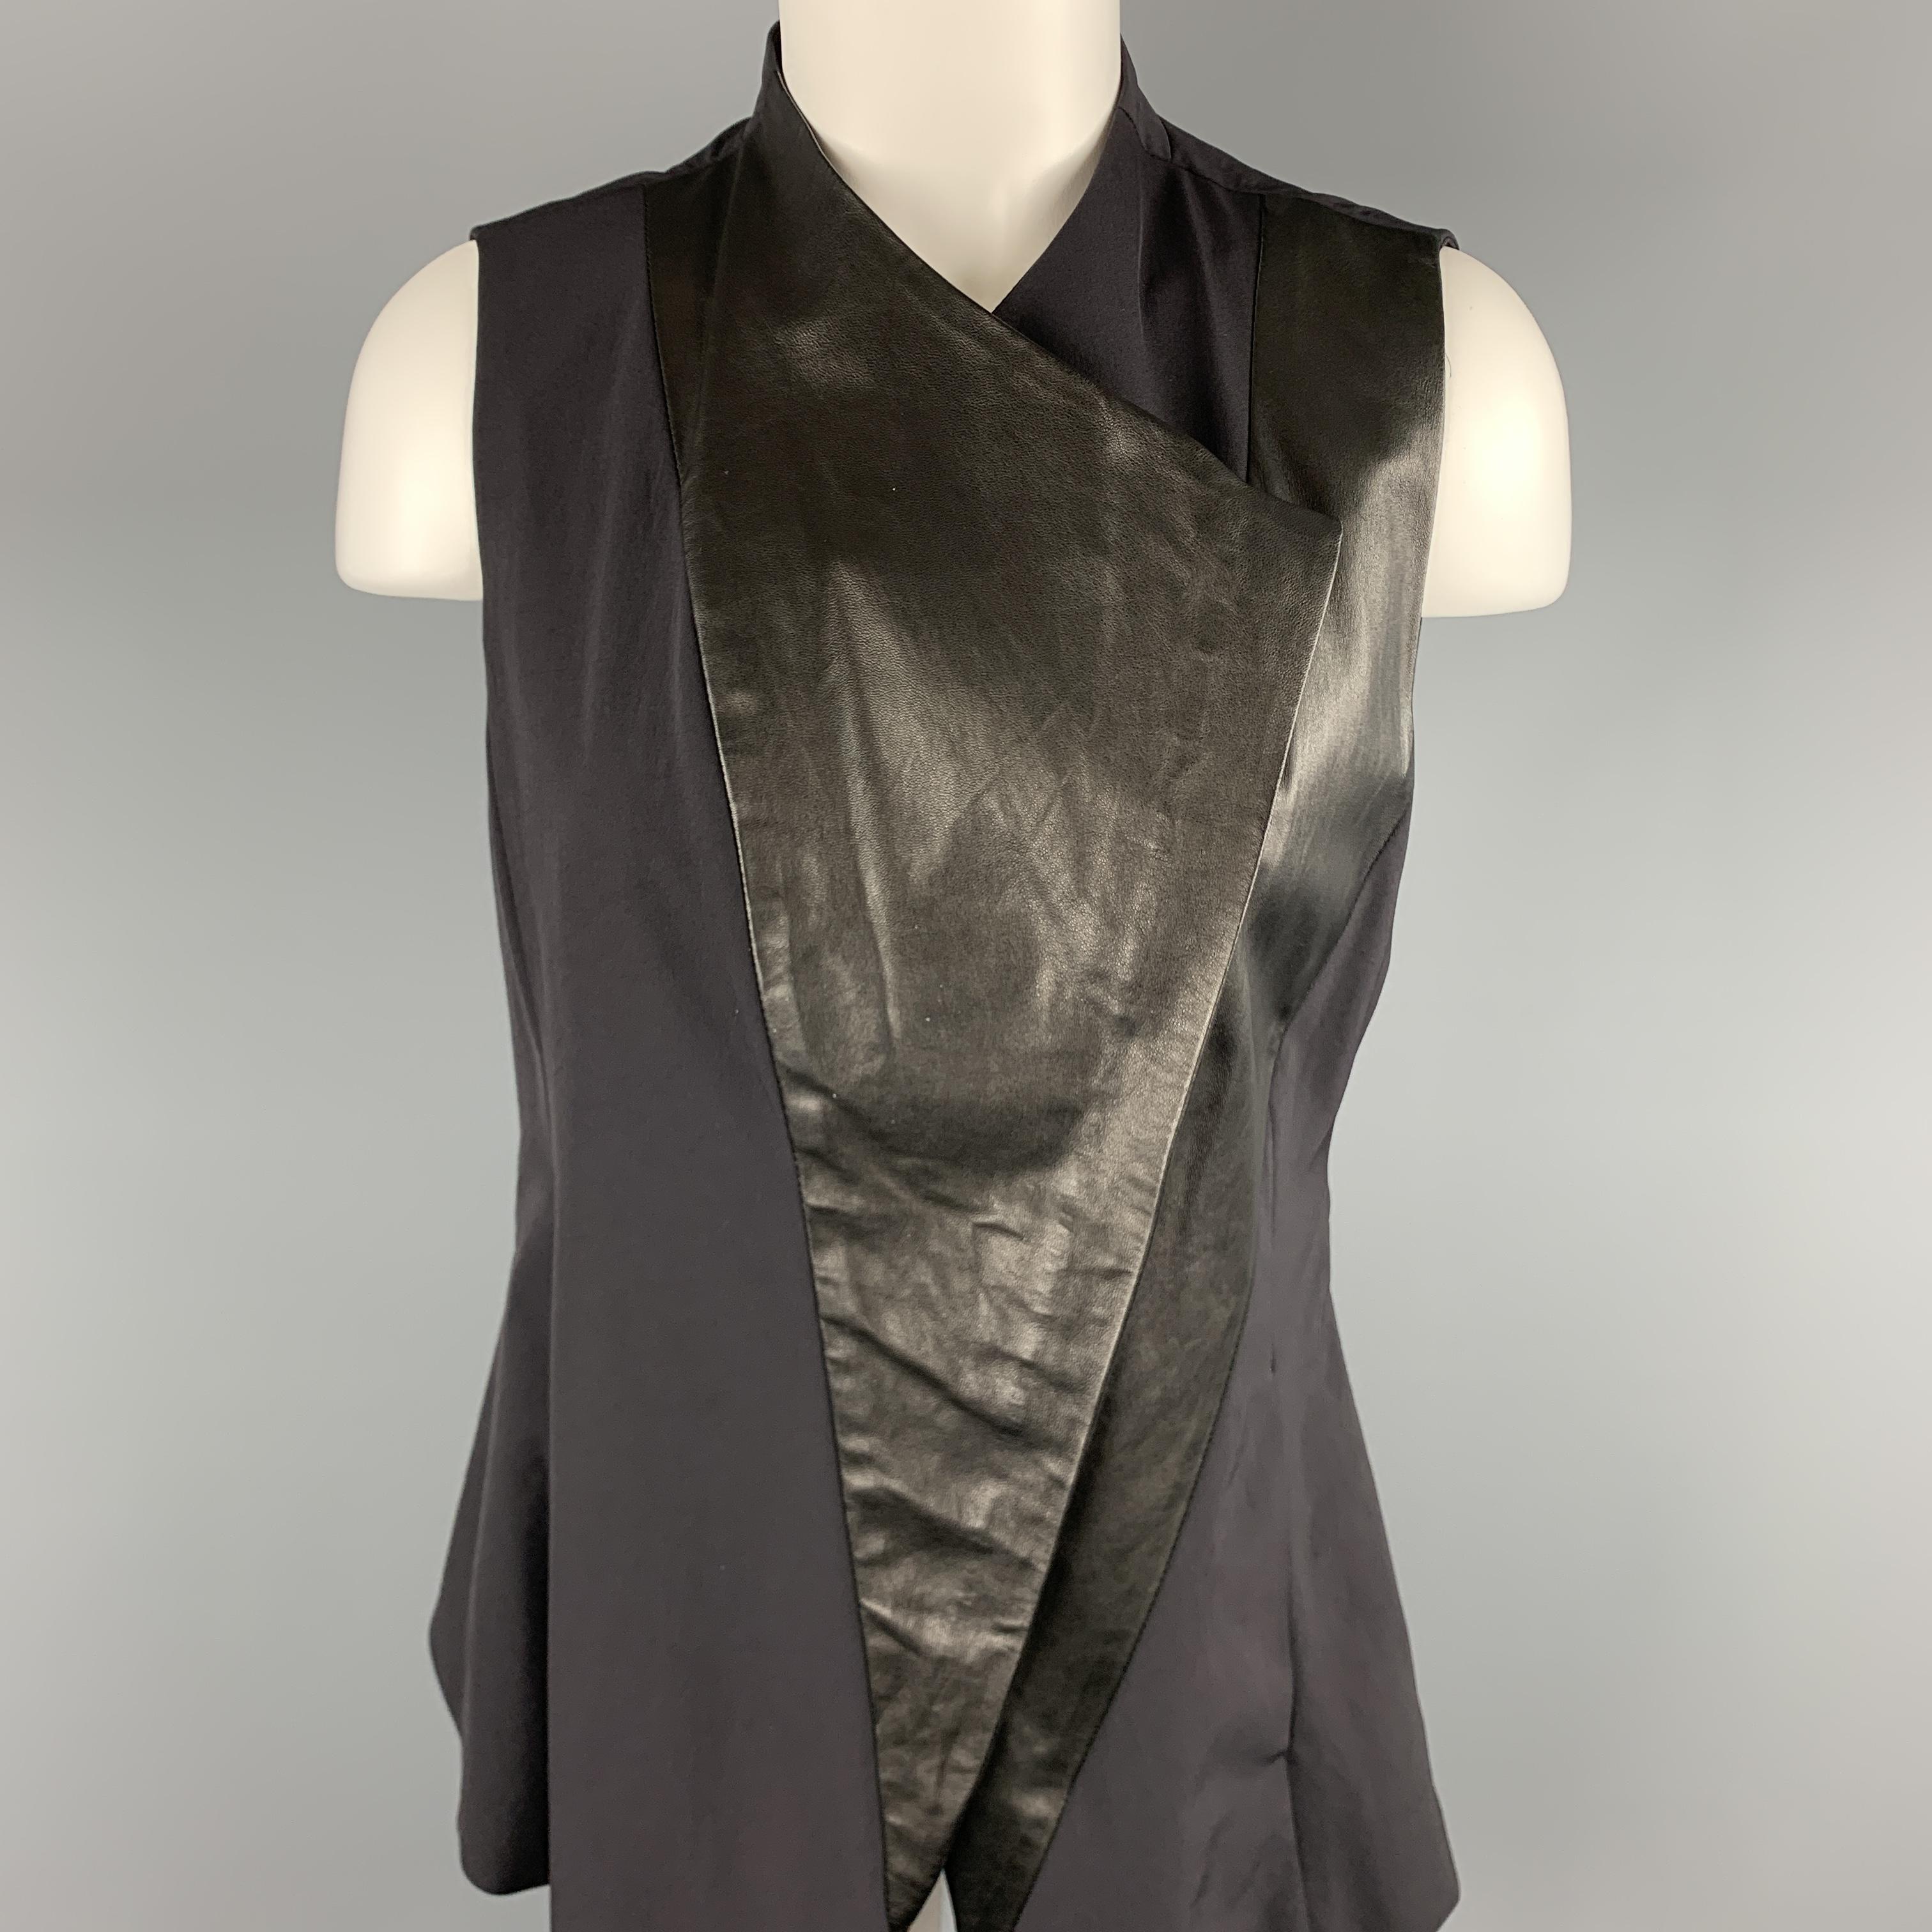 DEMOO PARKCHOONMO vest comes in black crepe with a chiffon, belted back, and leather panel asymmetrical zip front. 

Excellent Pre-Owned Condition.
Marked: (no size)

Measurements:

Shoulder: 12 in.
Bust: 36 in.
Length: 32 in.